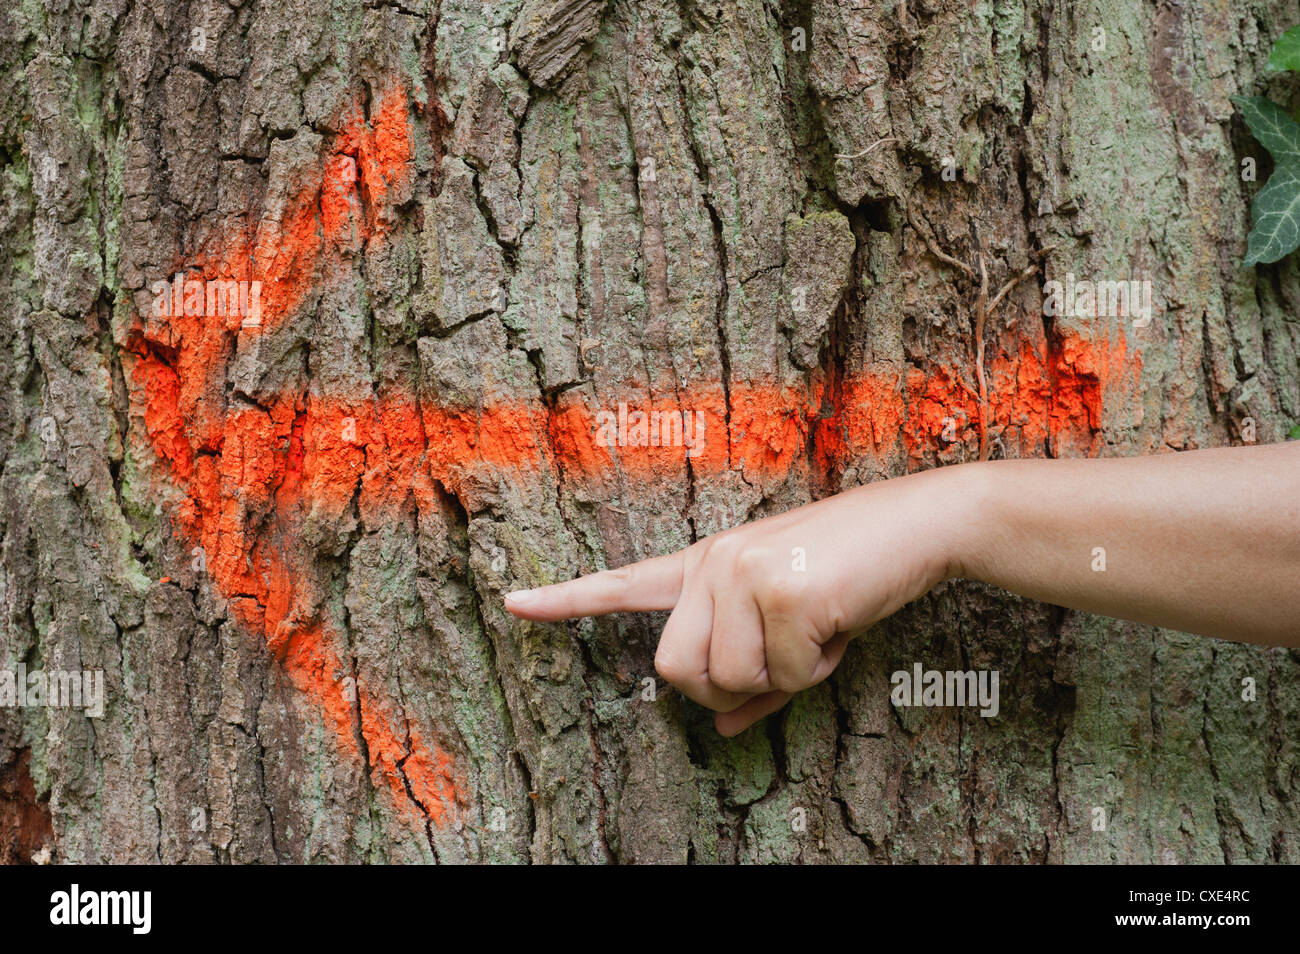 Arrow sign spray painted on tree trunk, hand pointing in same direction Stock Photo